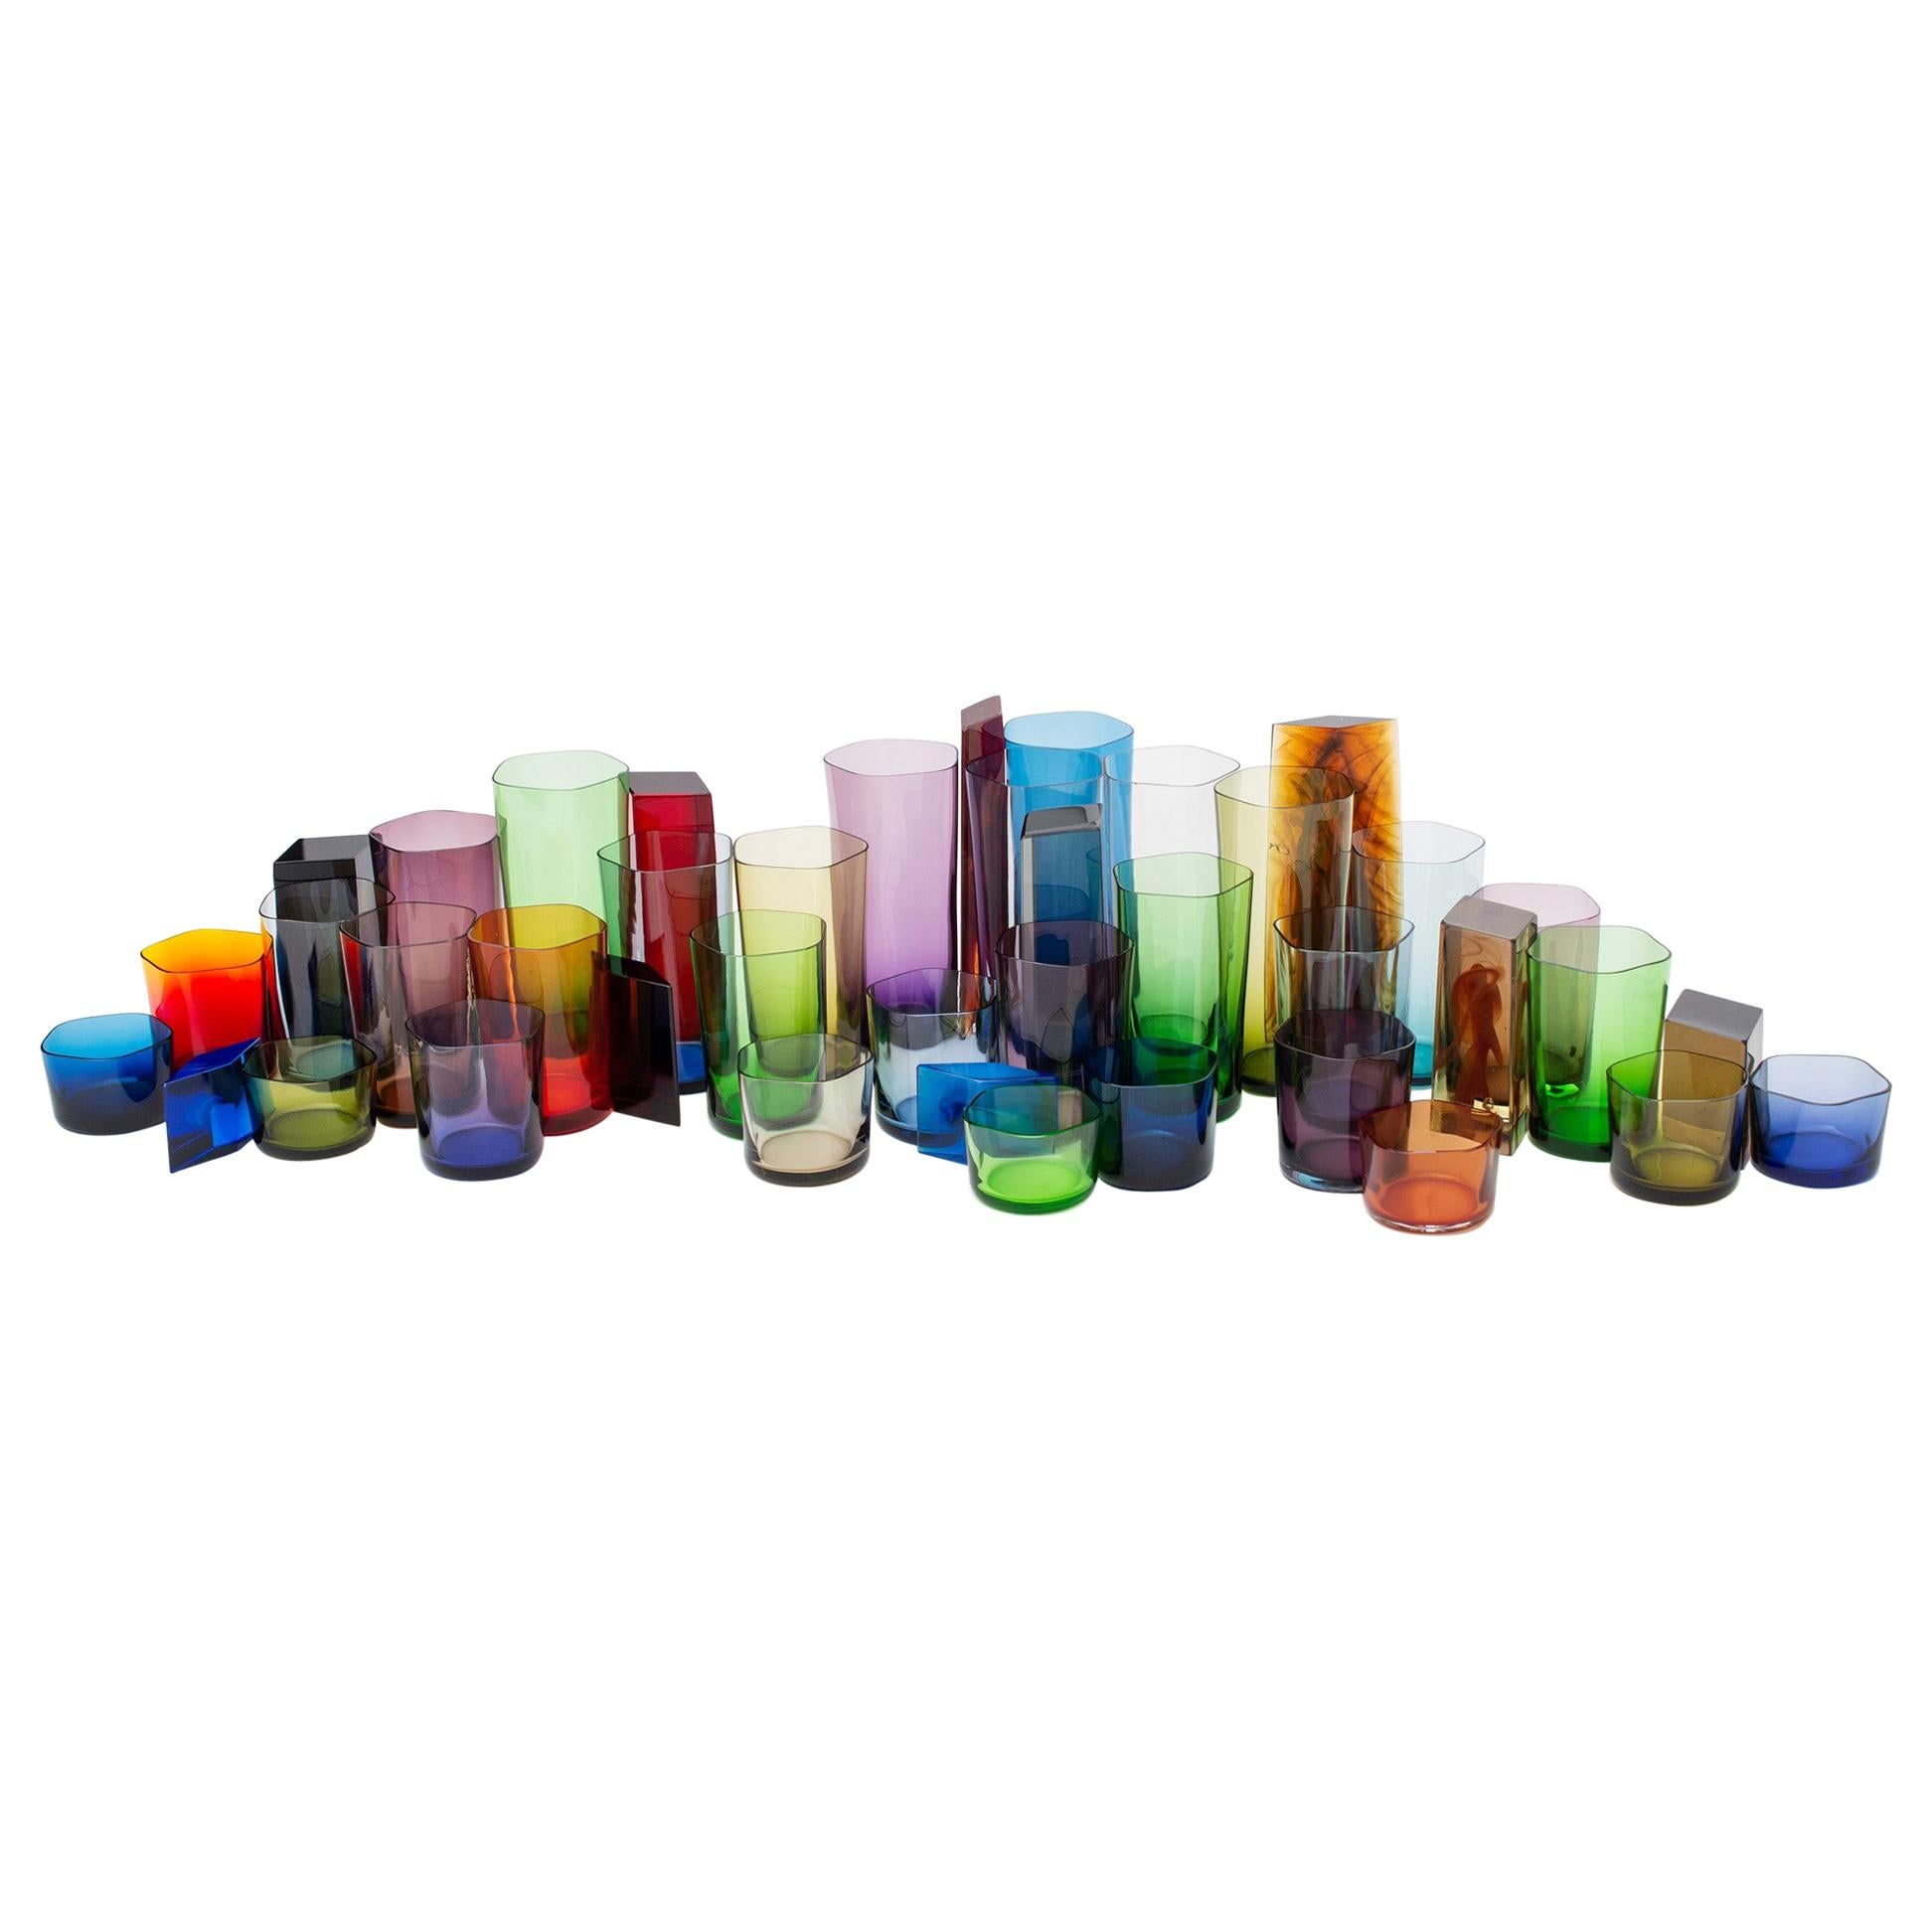 Polygon Glassware by Omer Arbel For OAO Works, Geometric Blown Glass Sculpture im Angebot